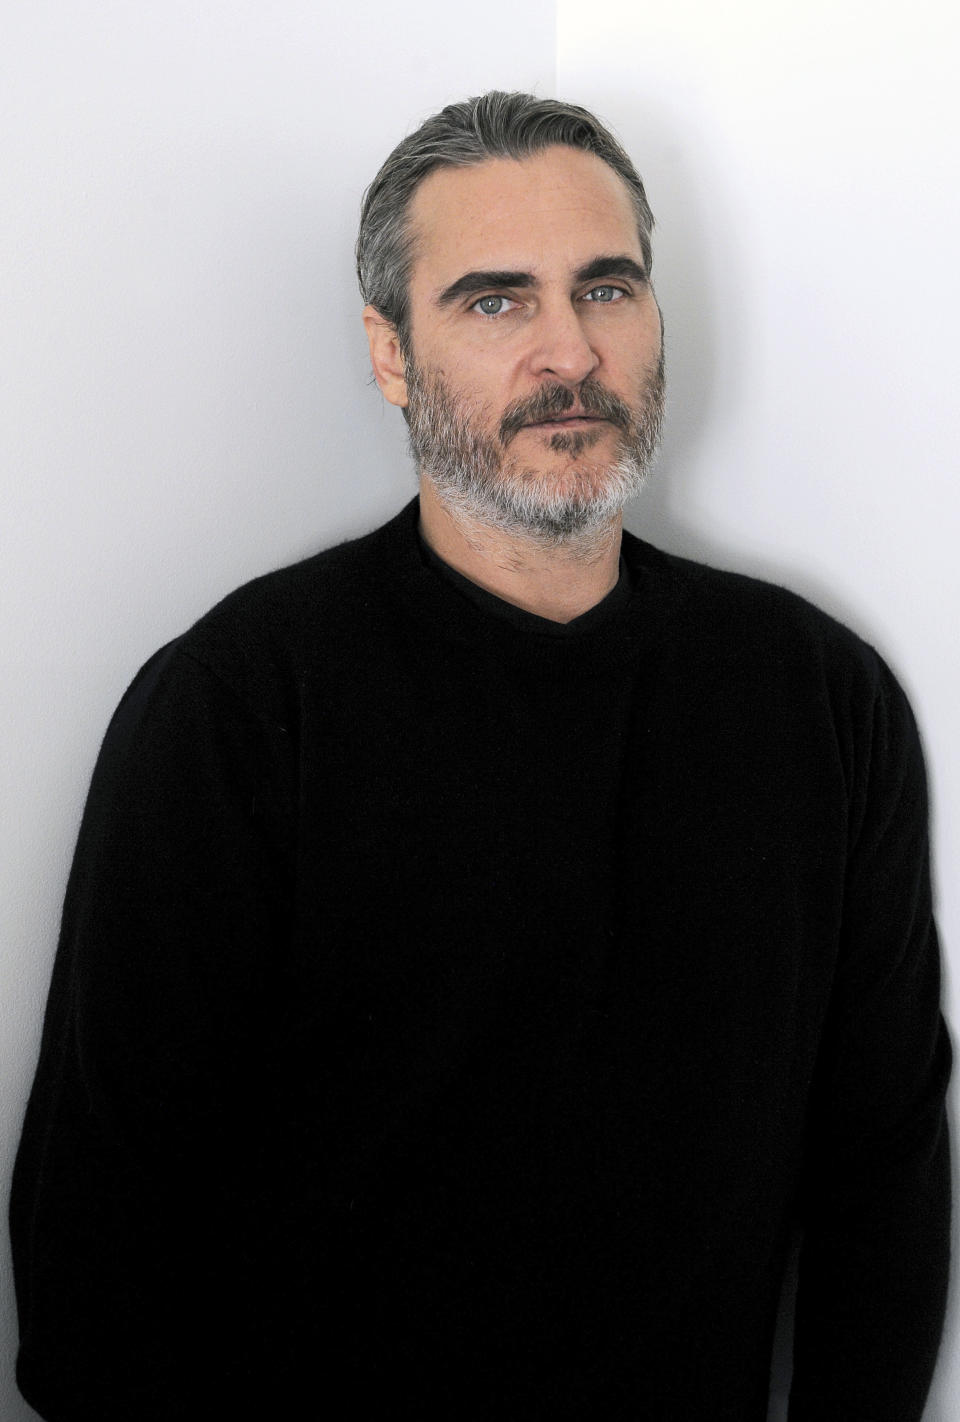 This Sept. 20, 2019 photo shows actor Joaquin Phoenix during a portrait session for the film "Joker," at the Four Seasons Hotel in Beverly Hills, Calif. (AP Photo/Richard Hartog)